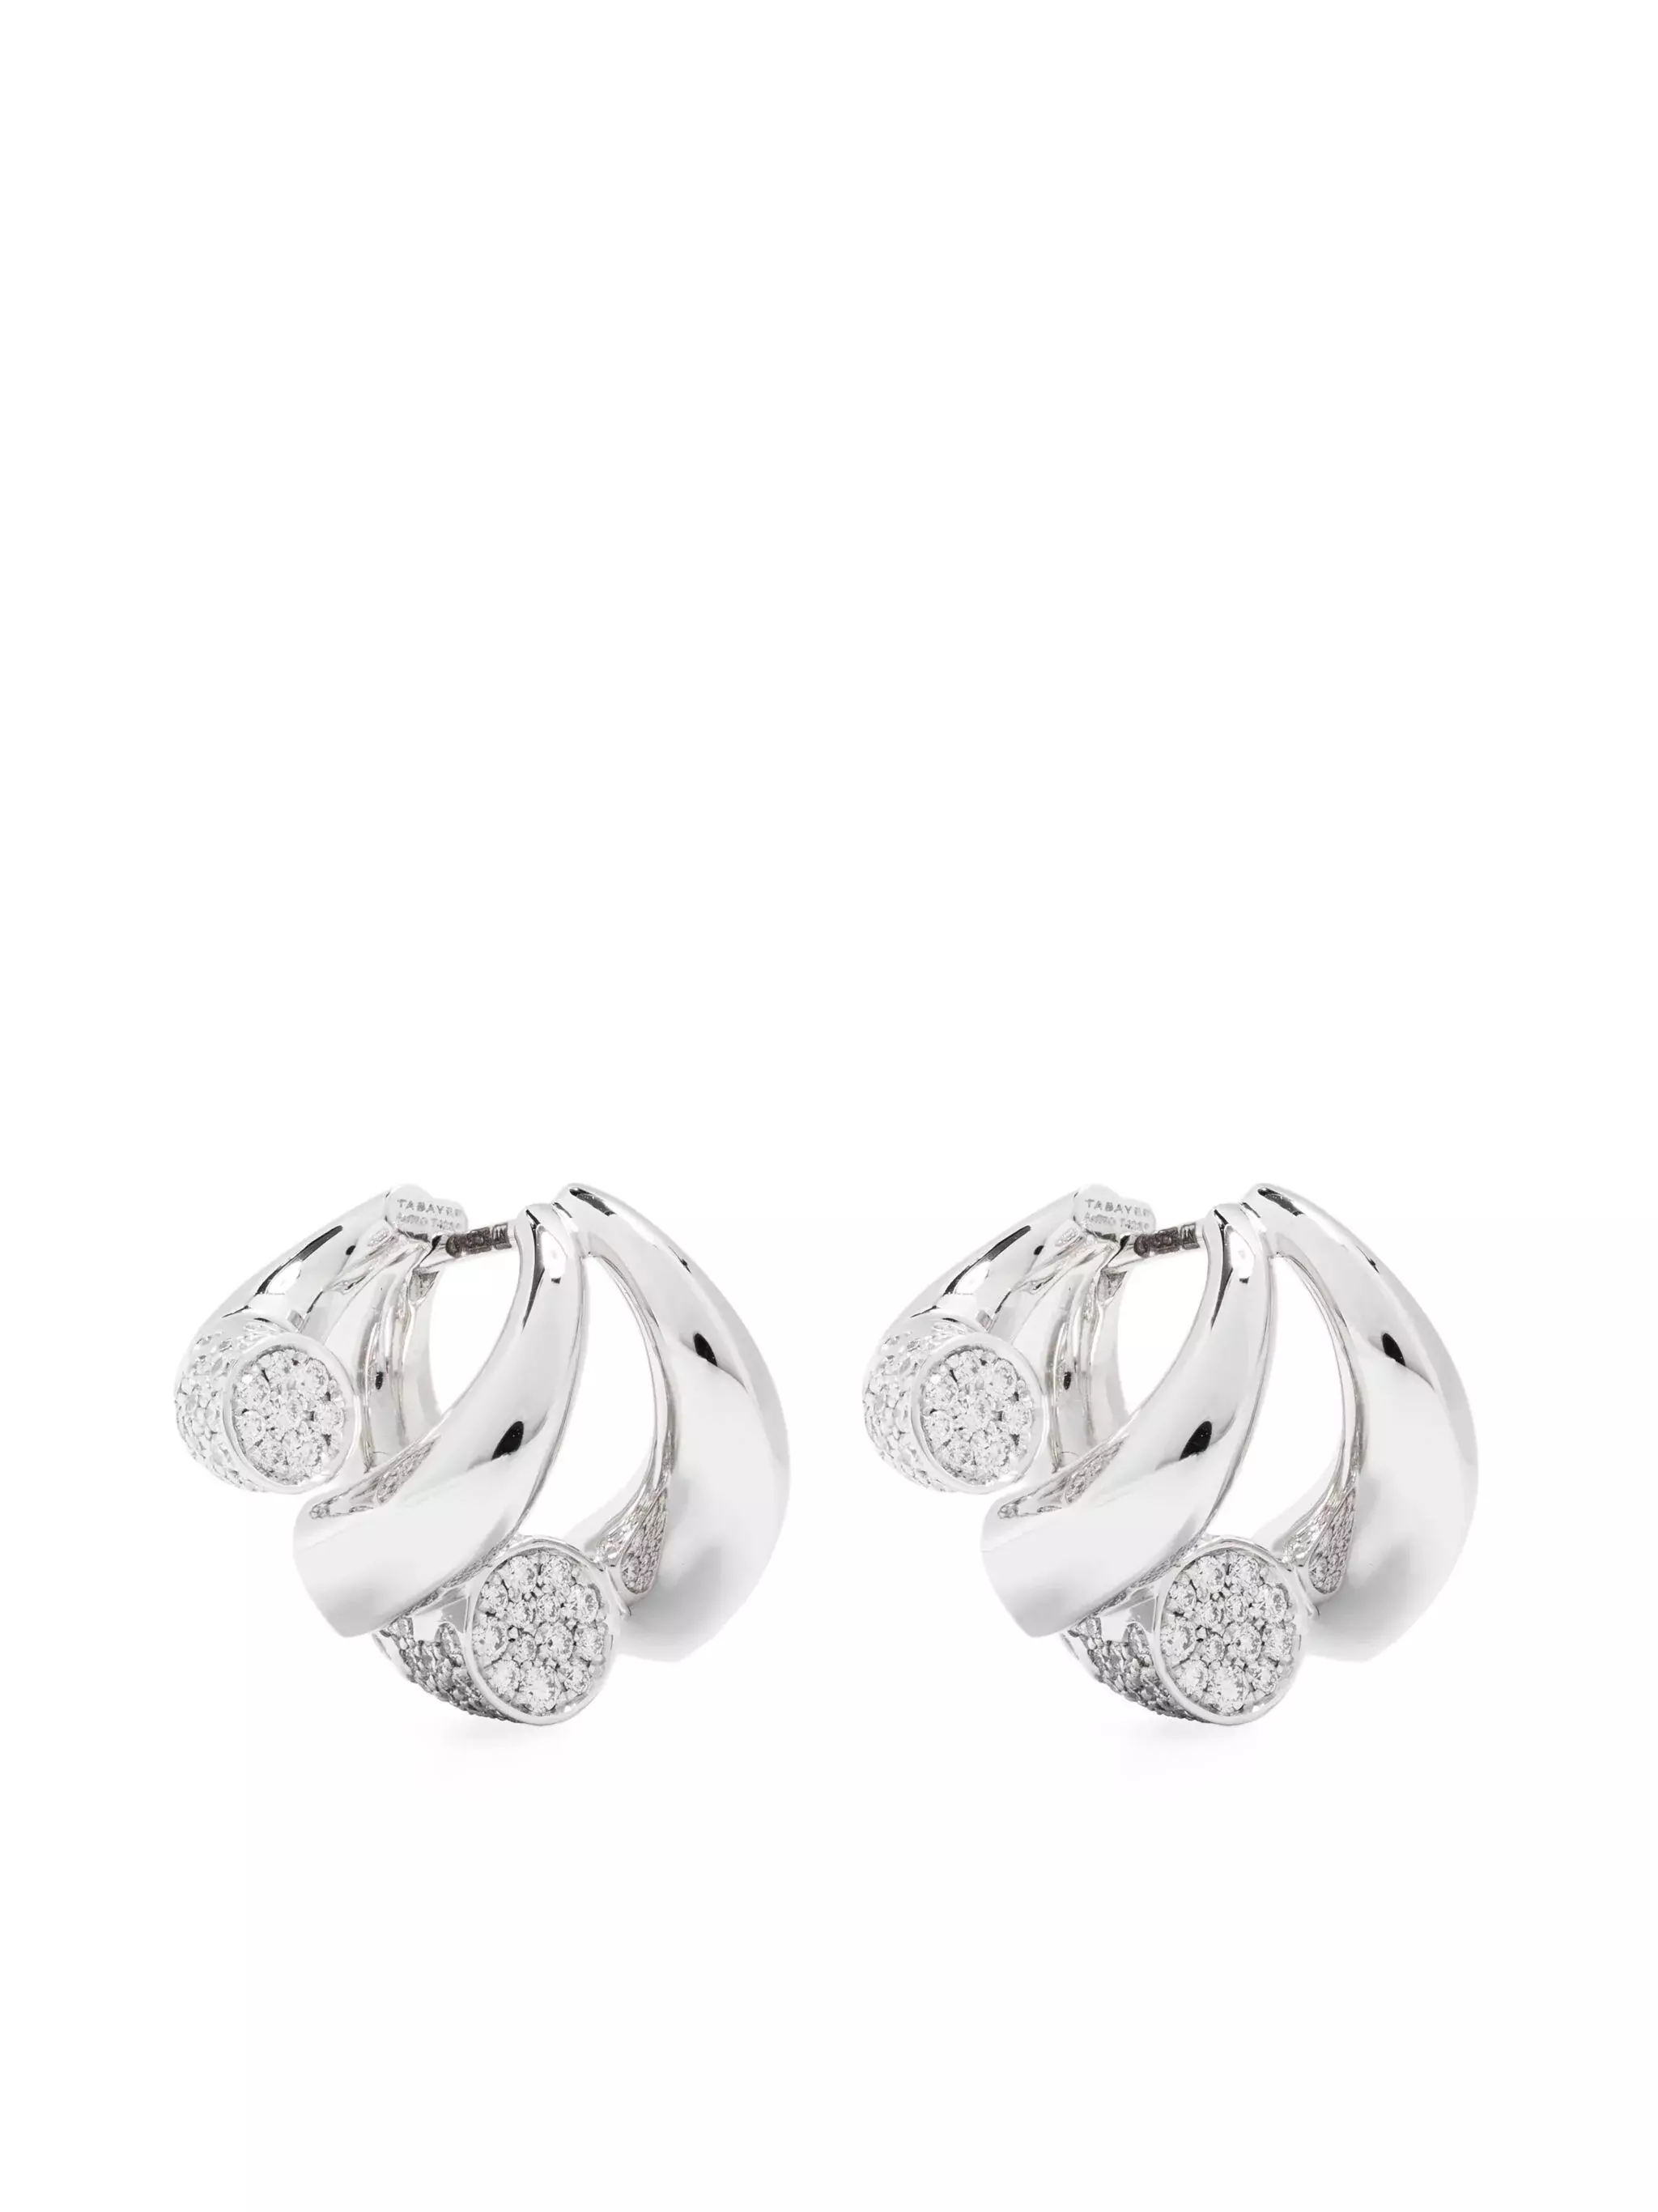 Tabayer Oera Earrings In White Gold Paved With Diamonds